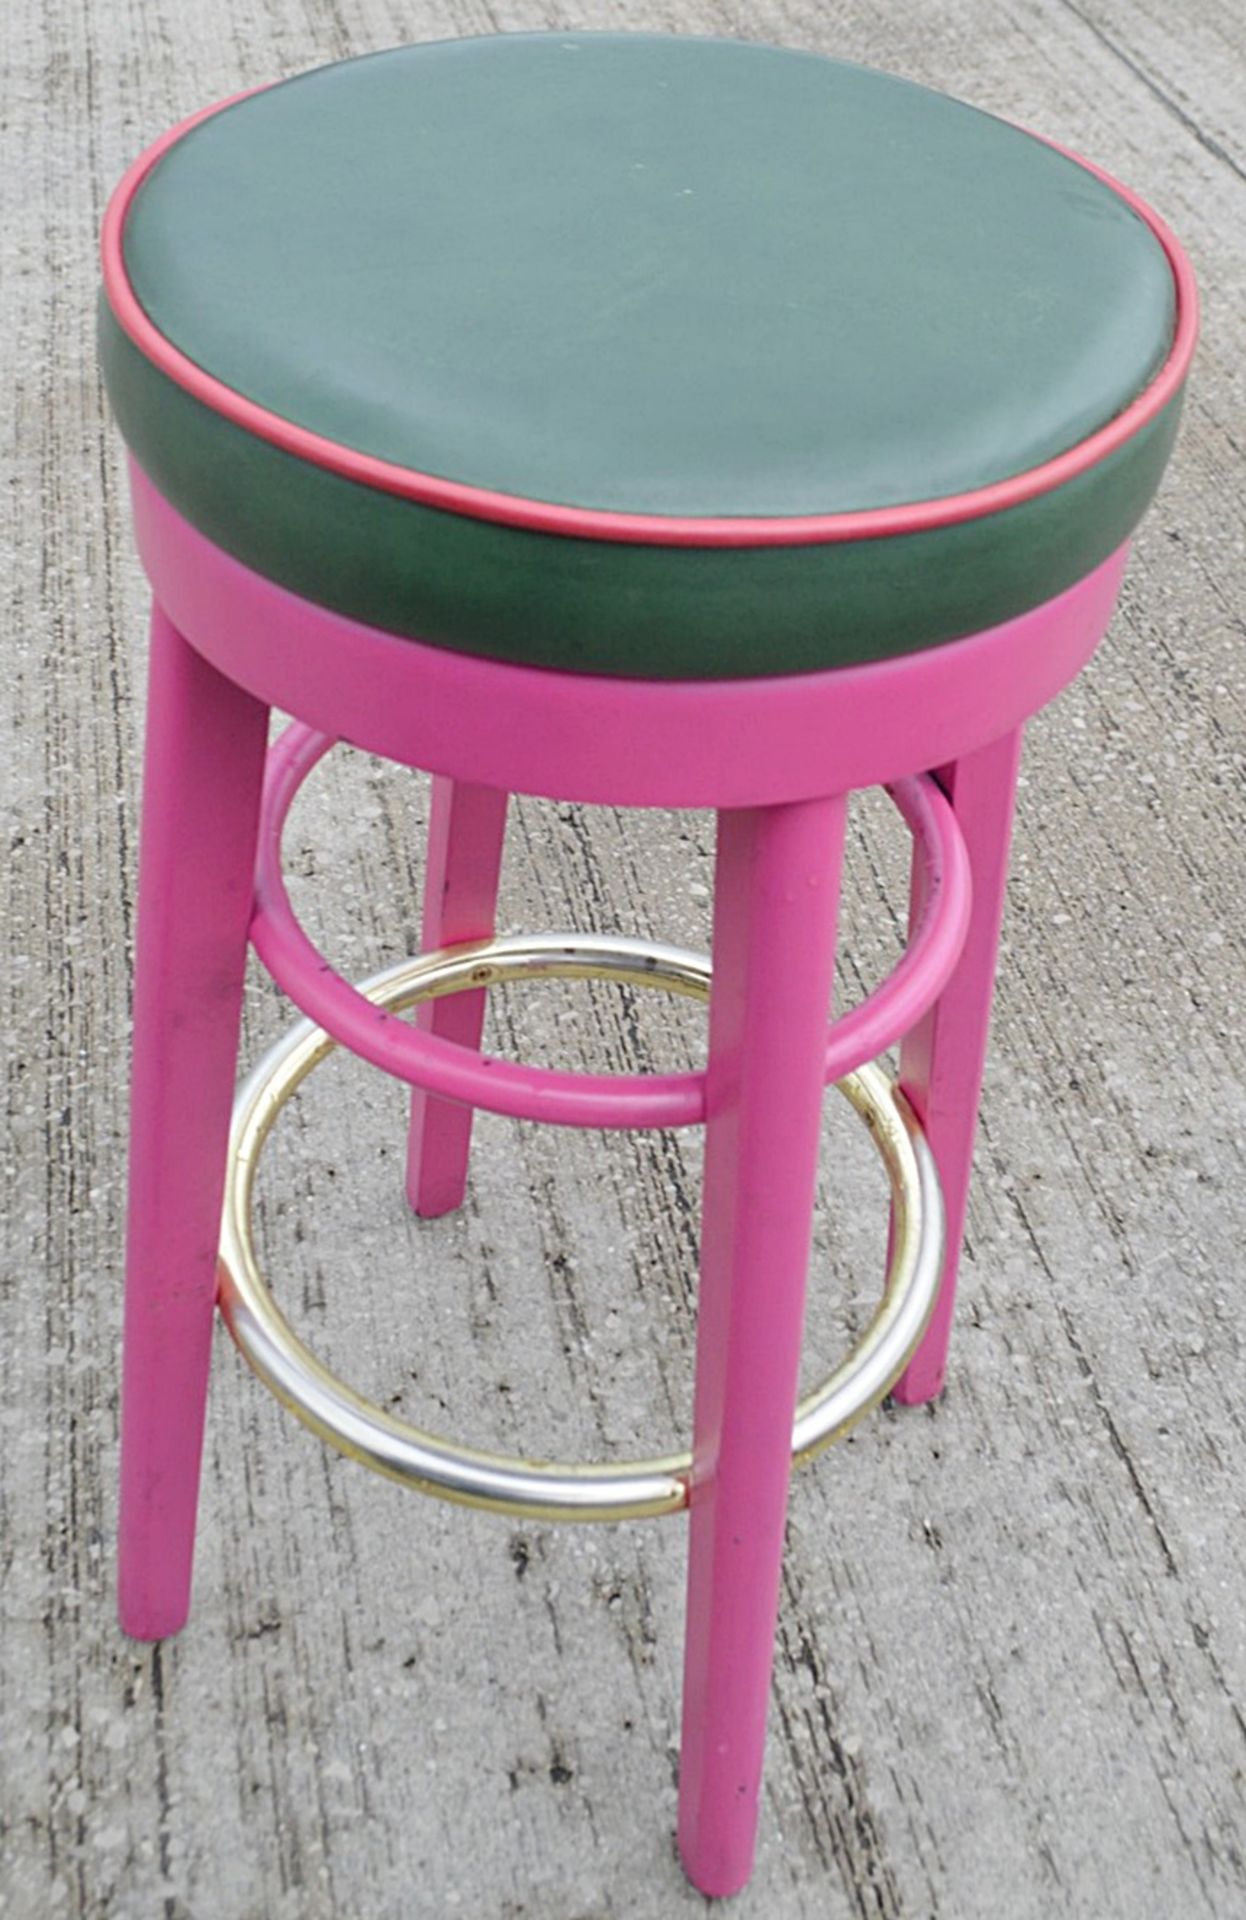 4 x Commercial Bar Stools Featuring Upholstered Seats And A Hot Pink Finish